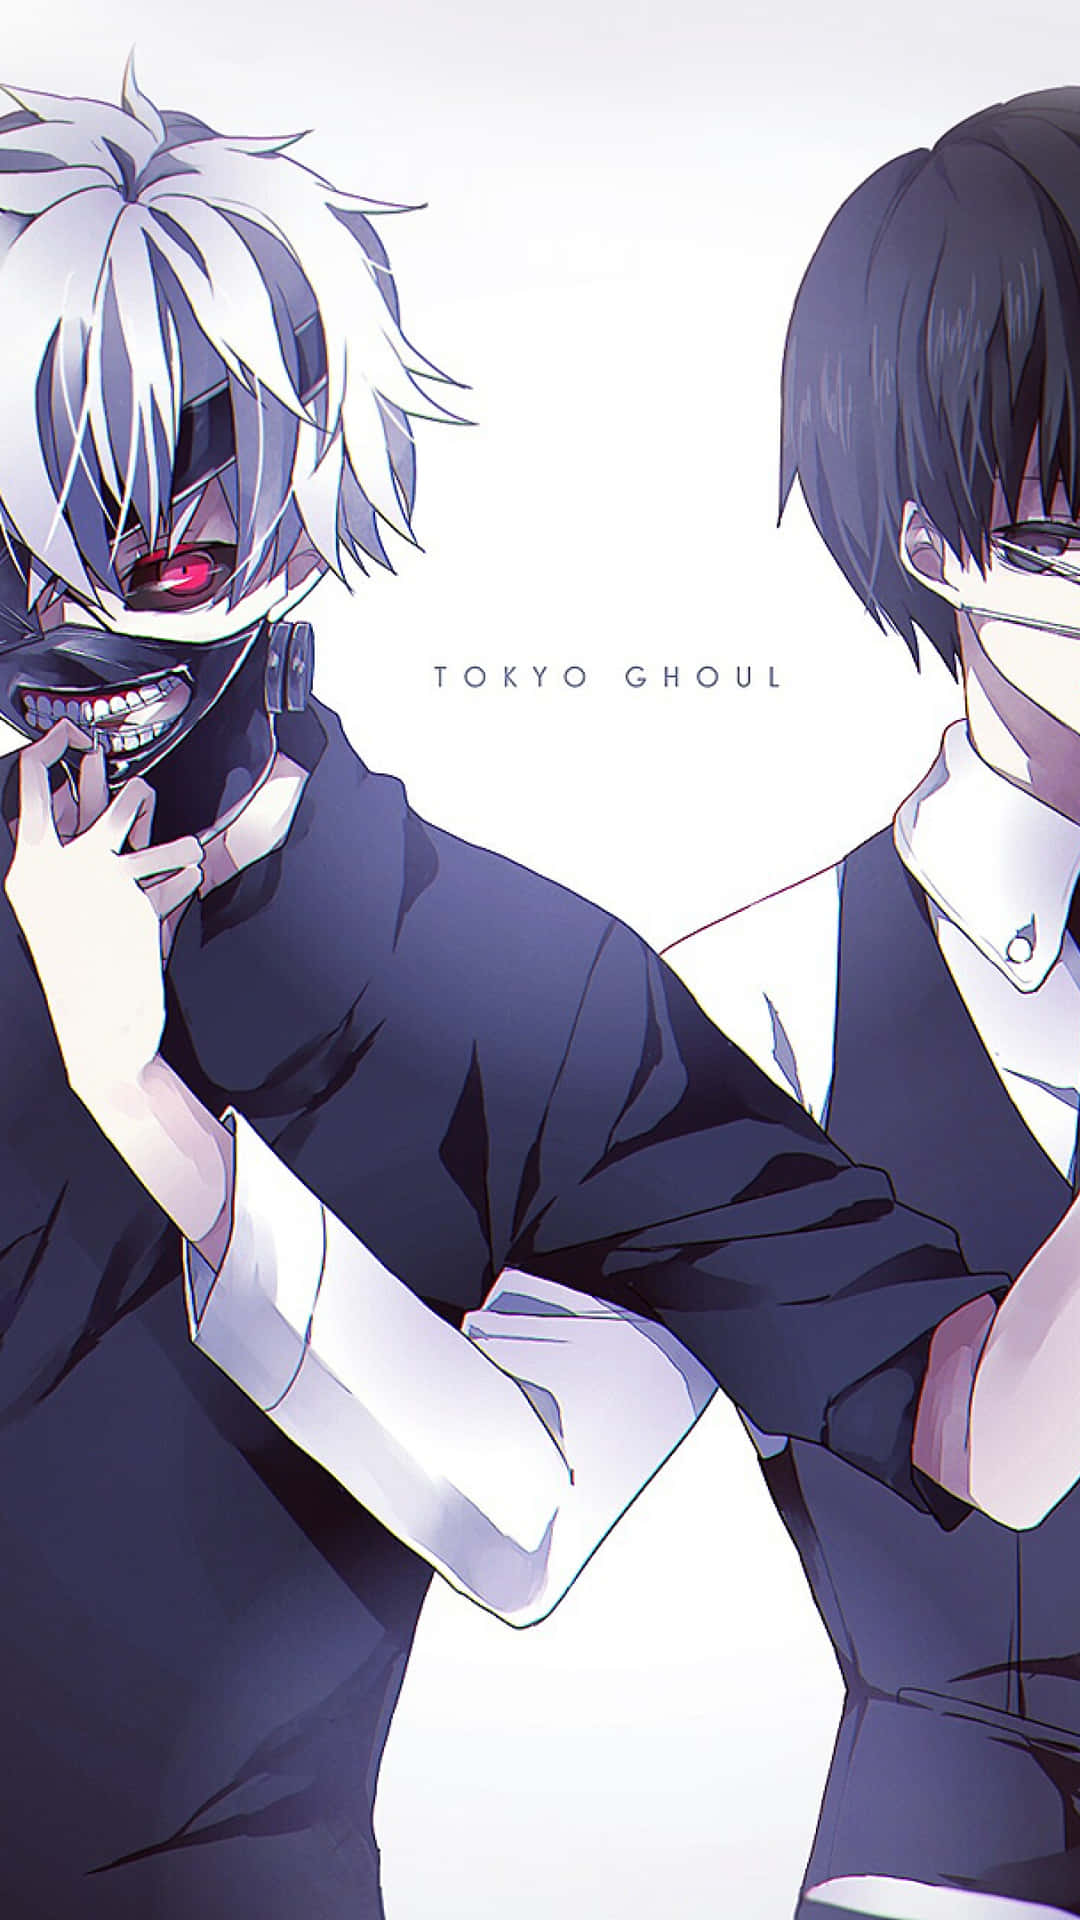 Two Anime Characters With Masks On